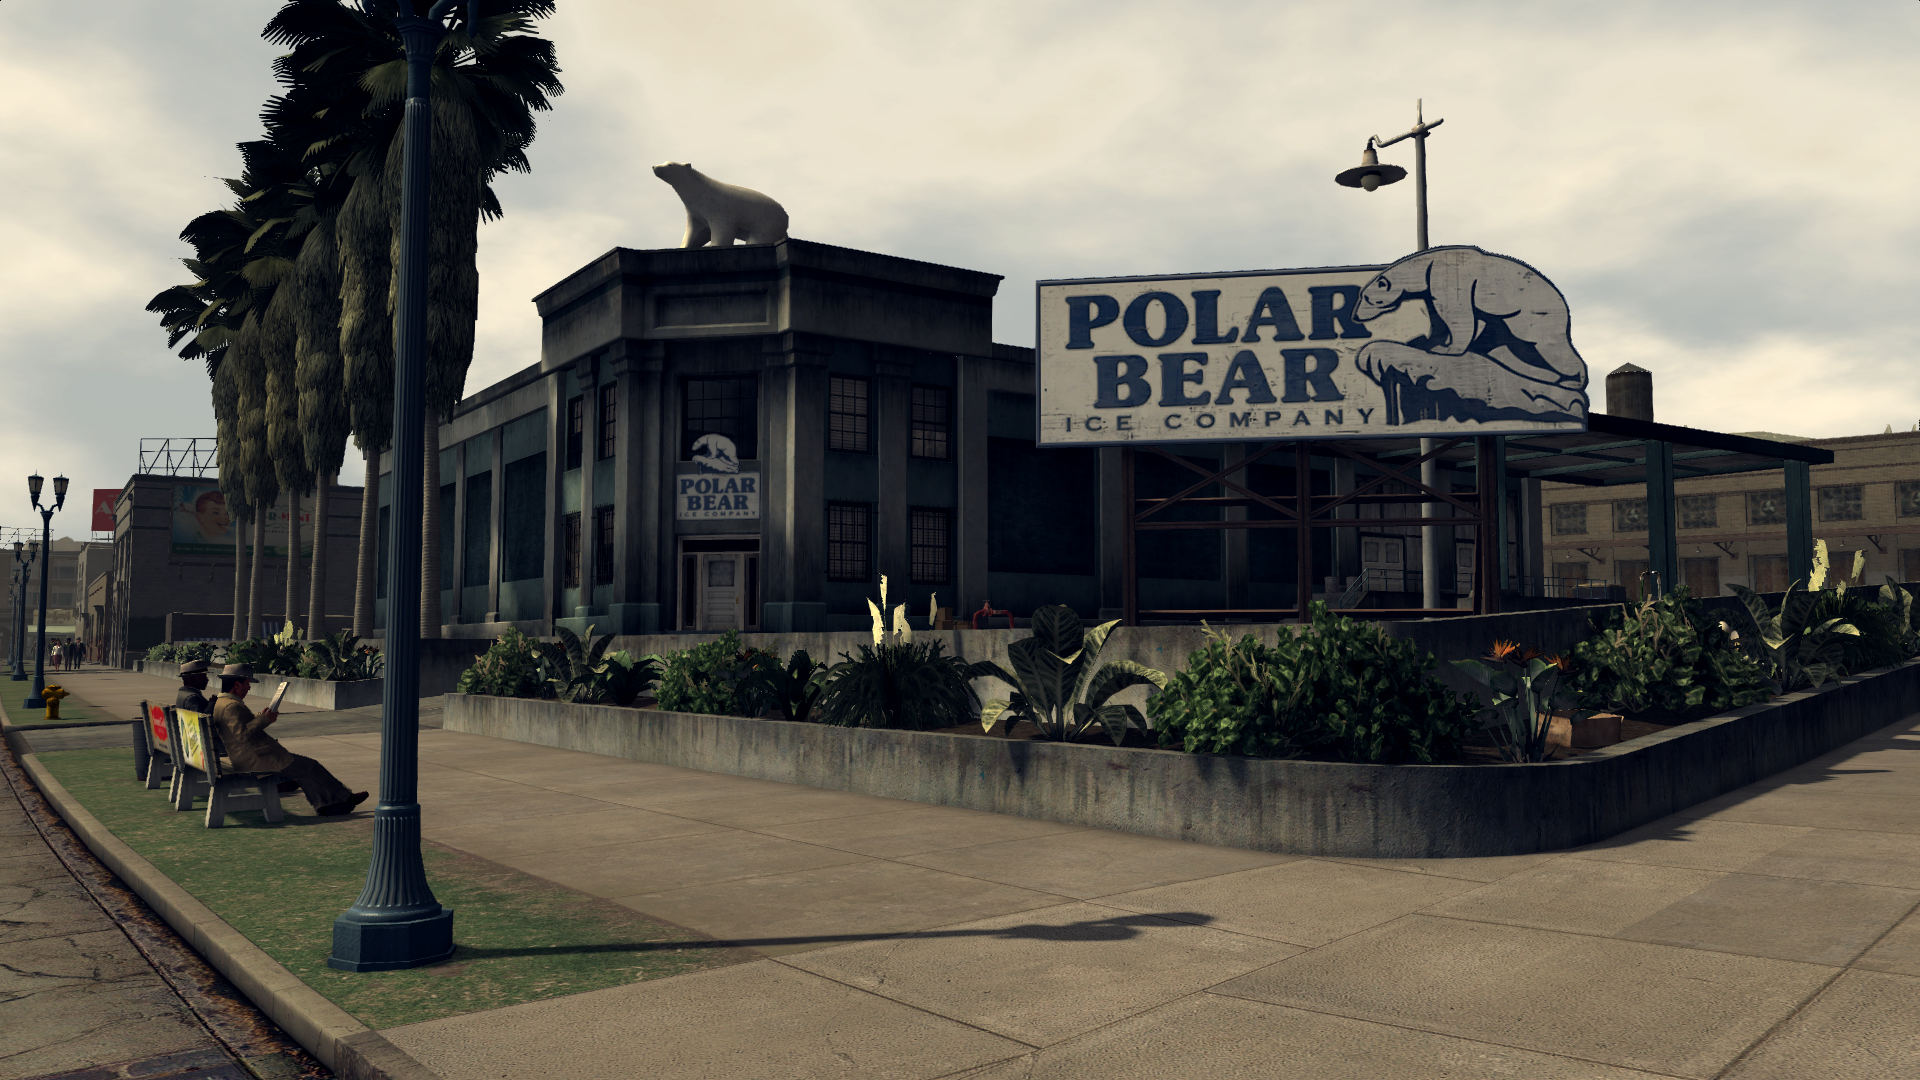 https://static.wikia.nocookie.net/lanoire/images/7/71/Polar_Bear_Ice_Co.png/revision/latest?cb=20180108043439